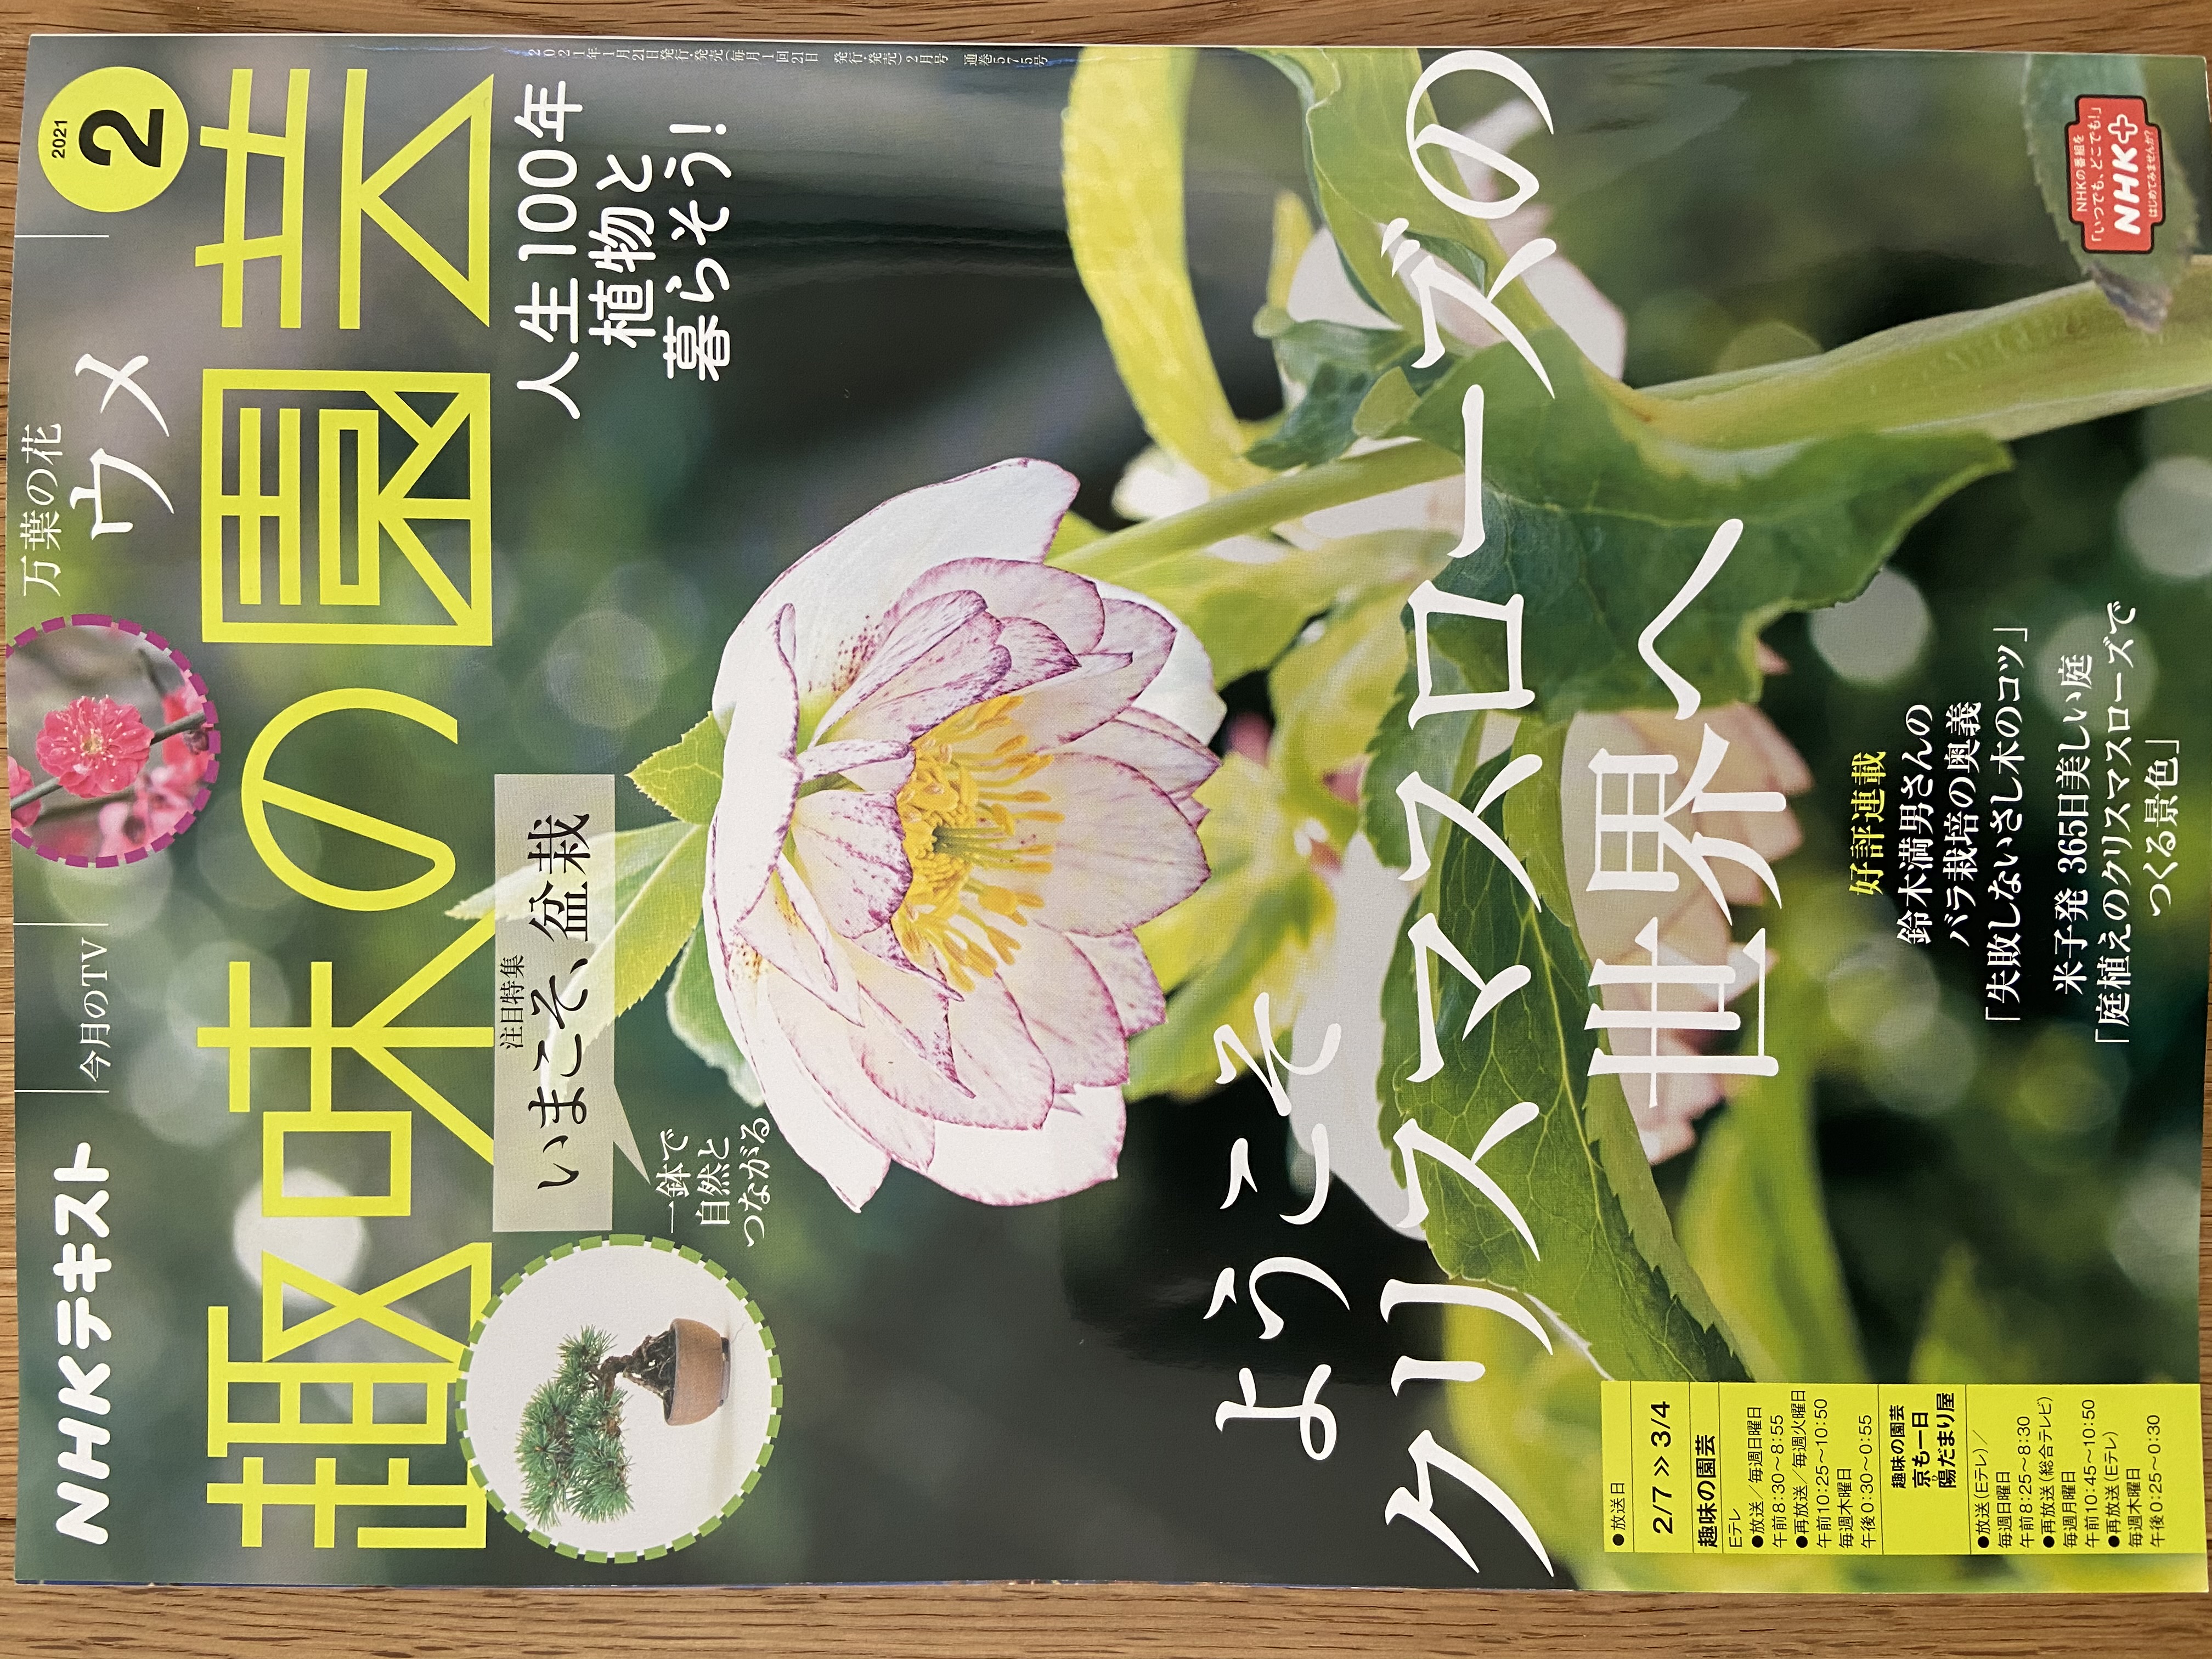 PUBLISHED IN A MAGAZINE – SPECIES NURSERY